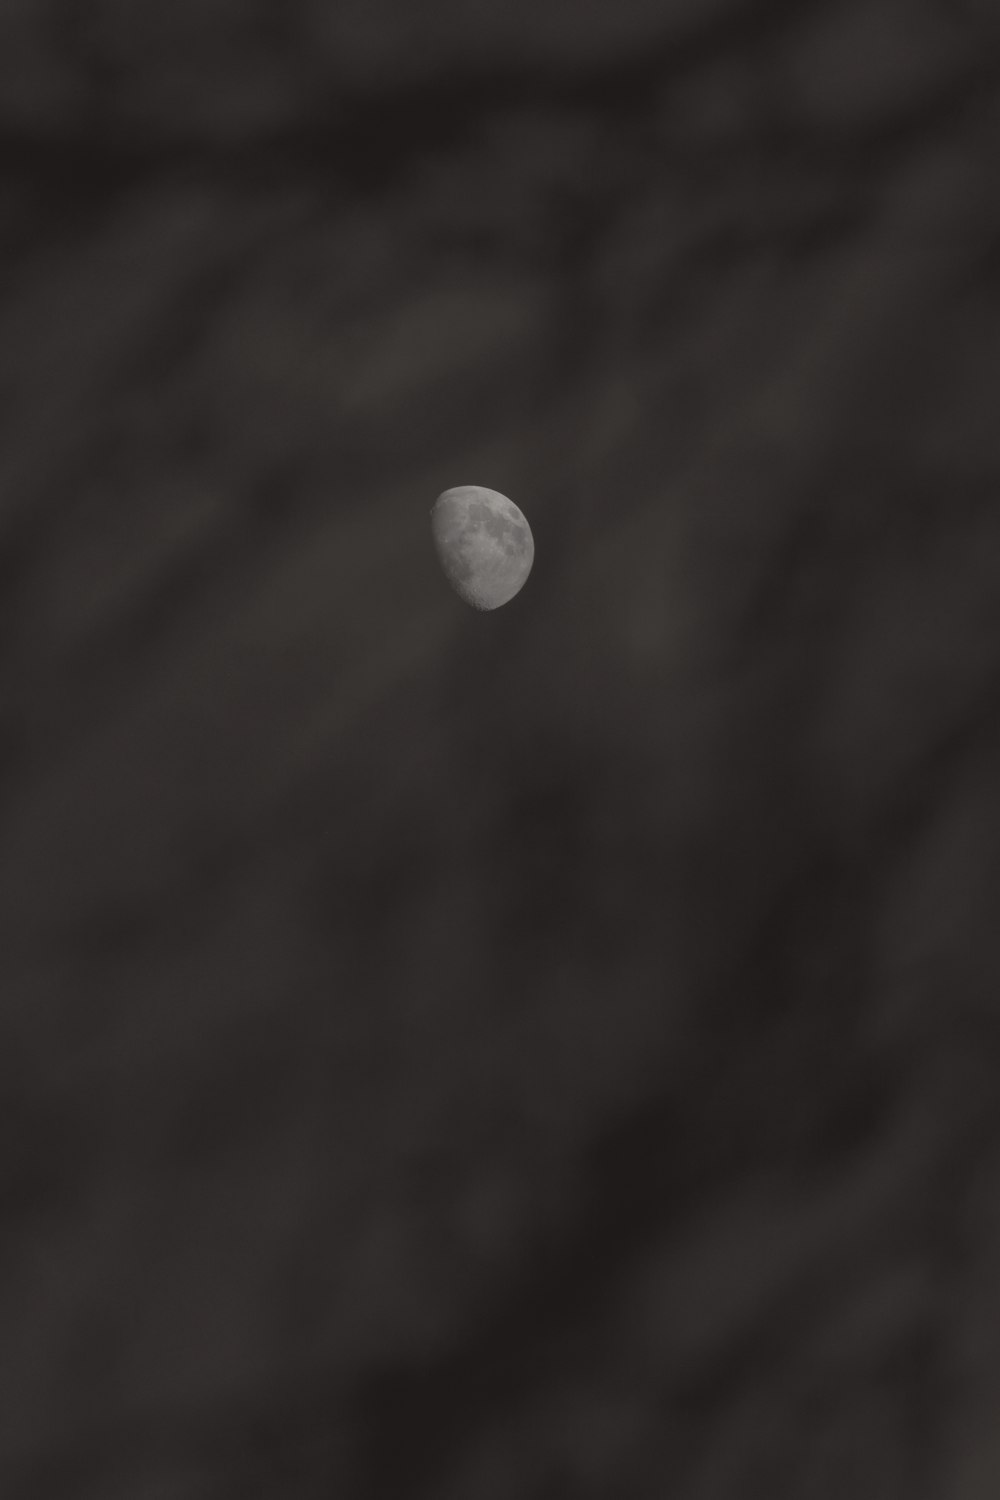 the moon is seen through the clouds in black and white